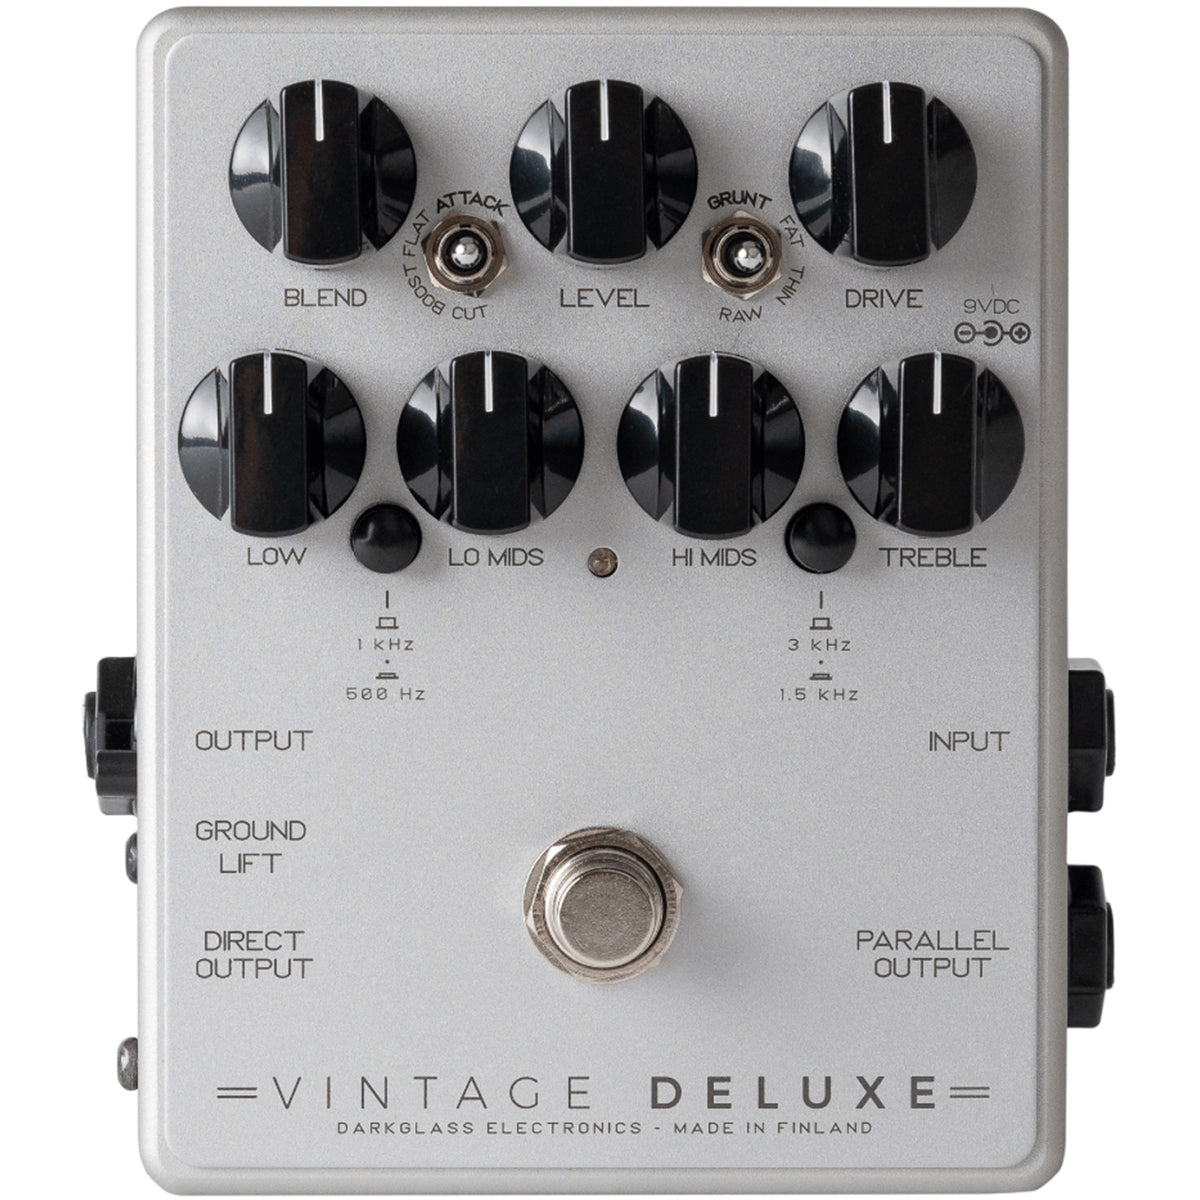 Darkglass Vintage Deluxe 3.0 Bass Effects Pedal